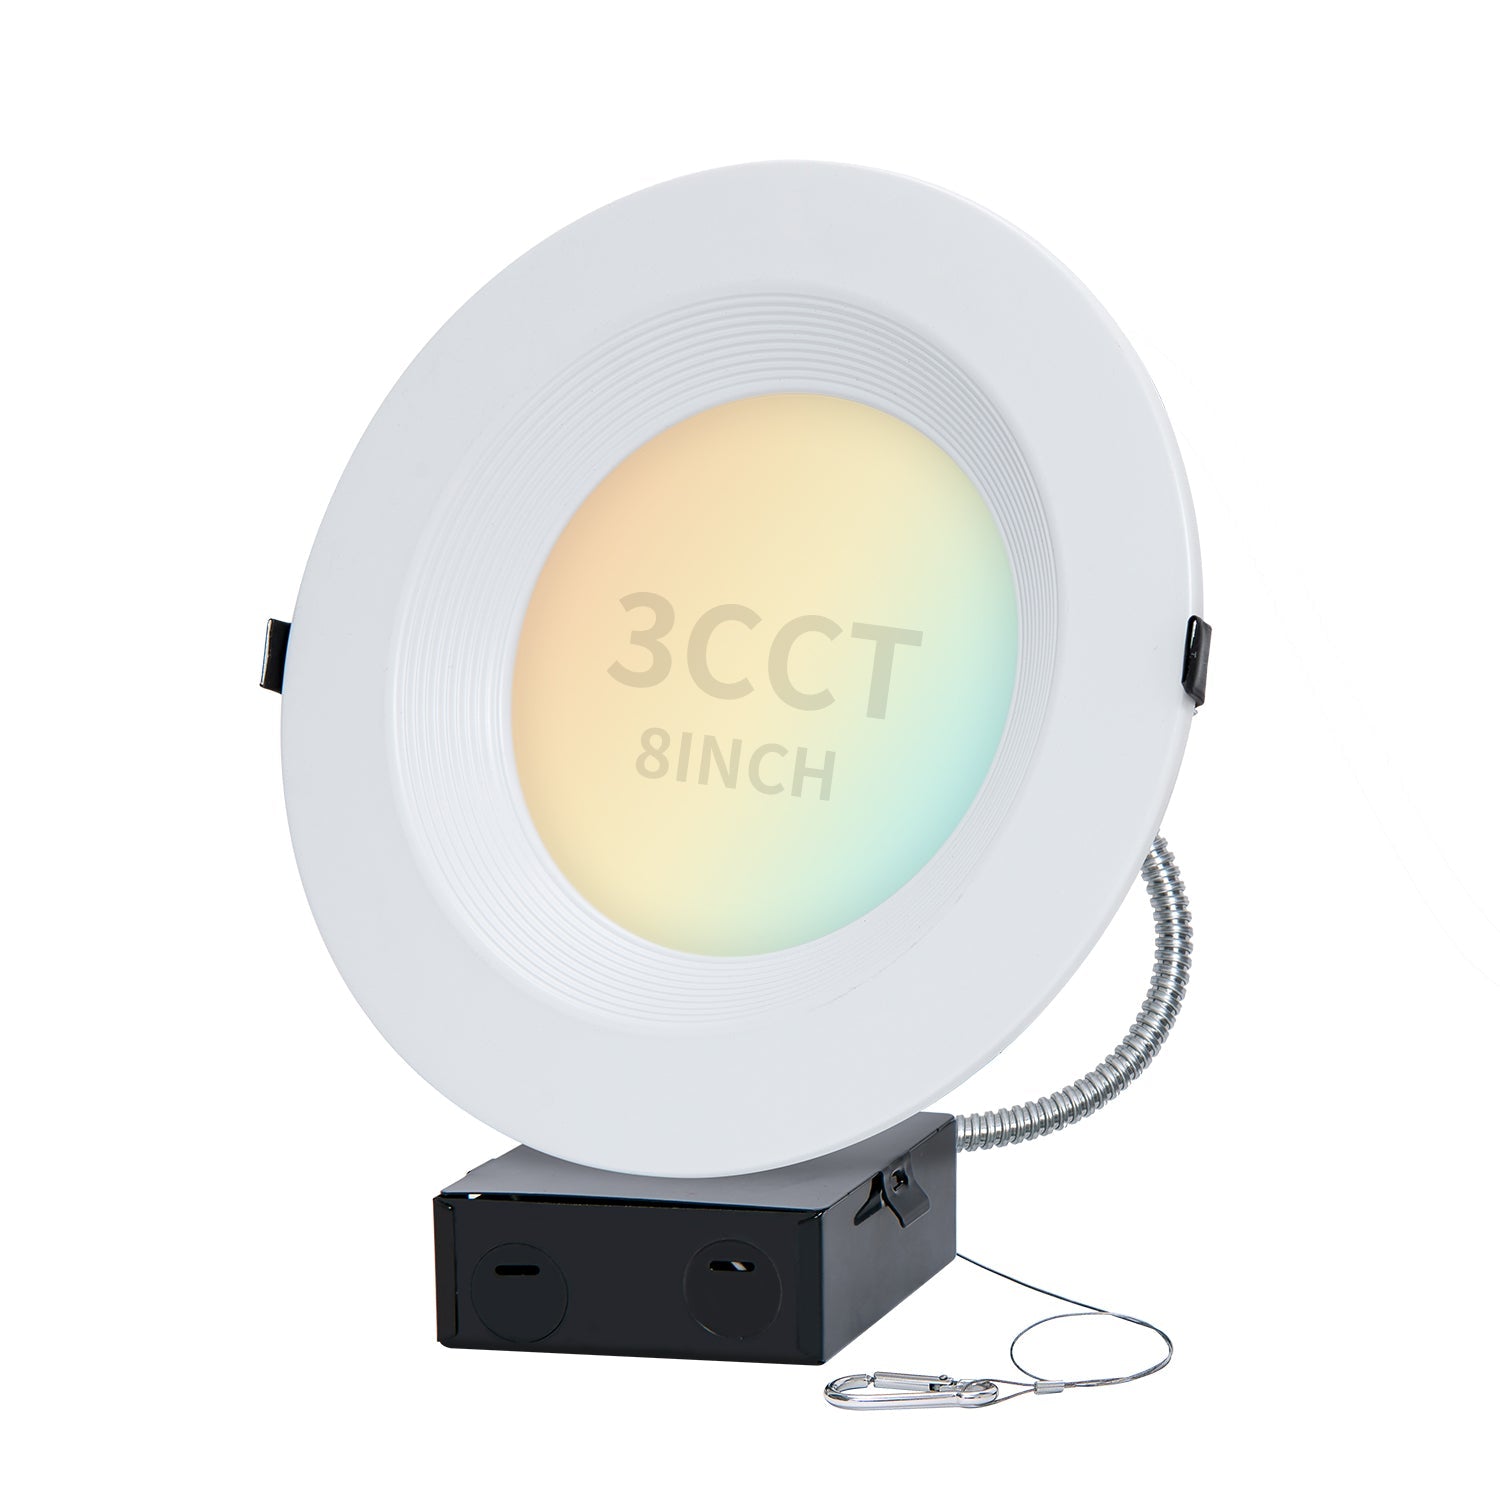 8 Inch Recessed LED Commercial Downlight with J-Box | Wattage Adjustable 16/21/27W | 3 Color Selectable 3000K-5000K | 120-277V | 0-10V Dimmable | IC Rated | Canless LED Downlight | UL Listed - Eco LED Lightings 